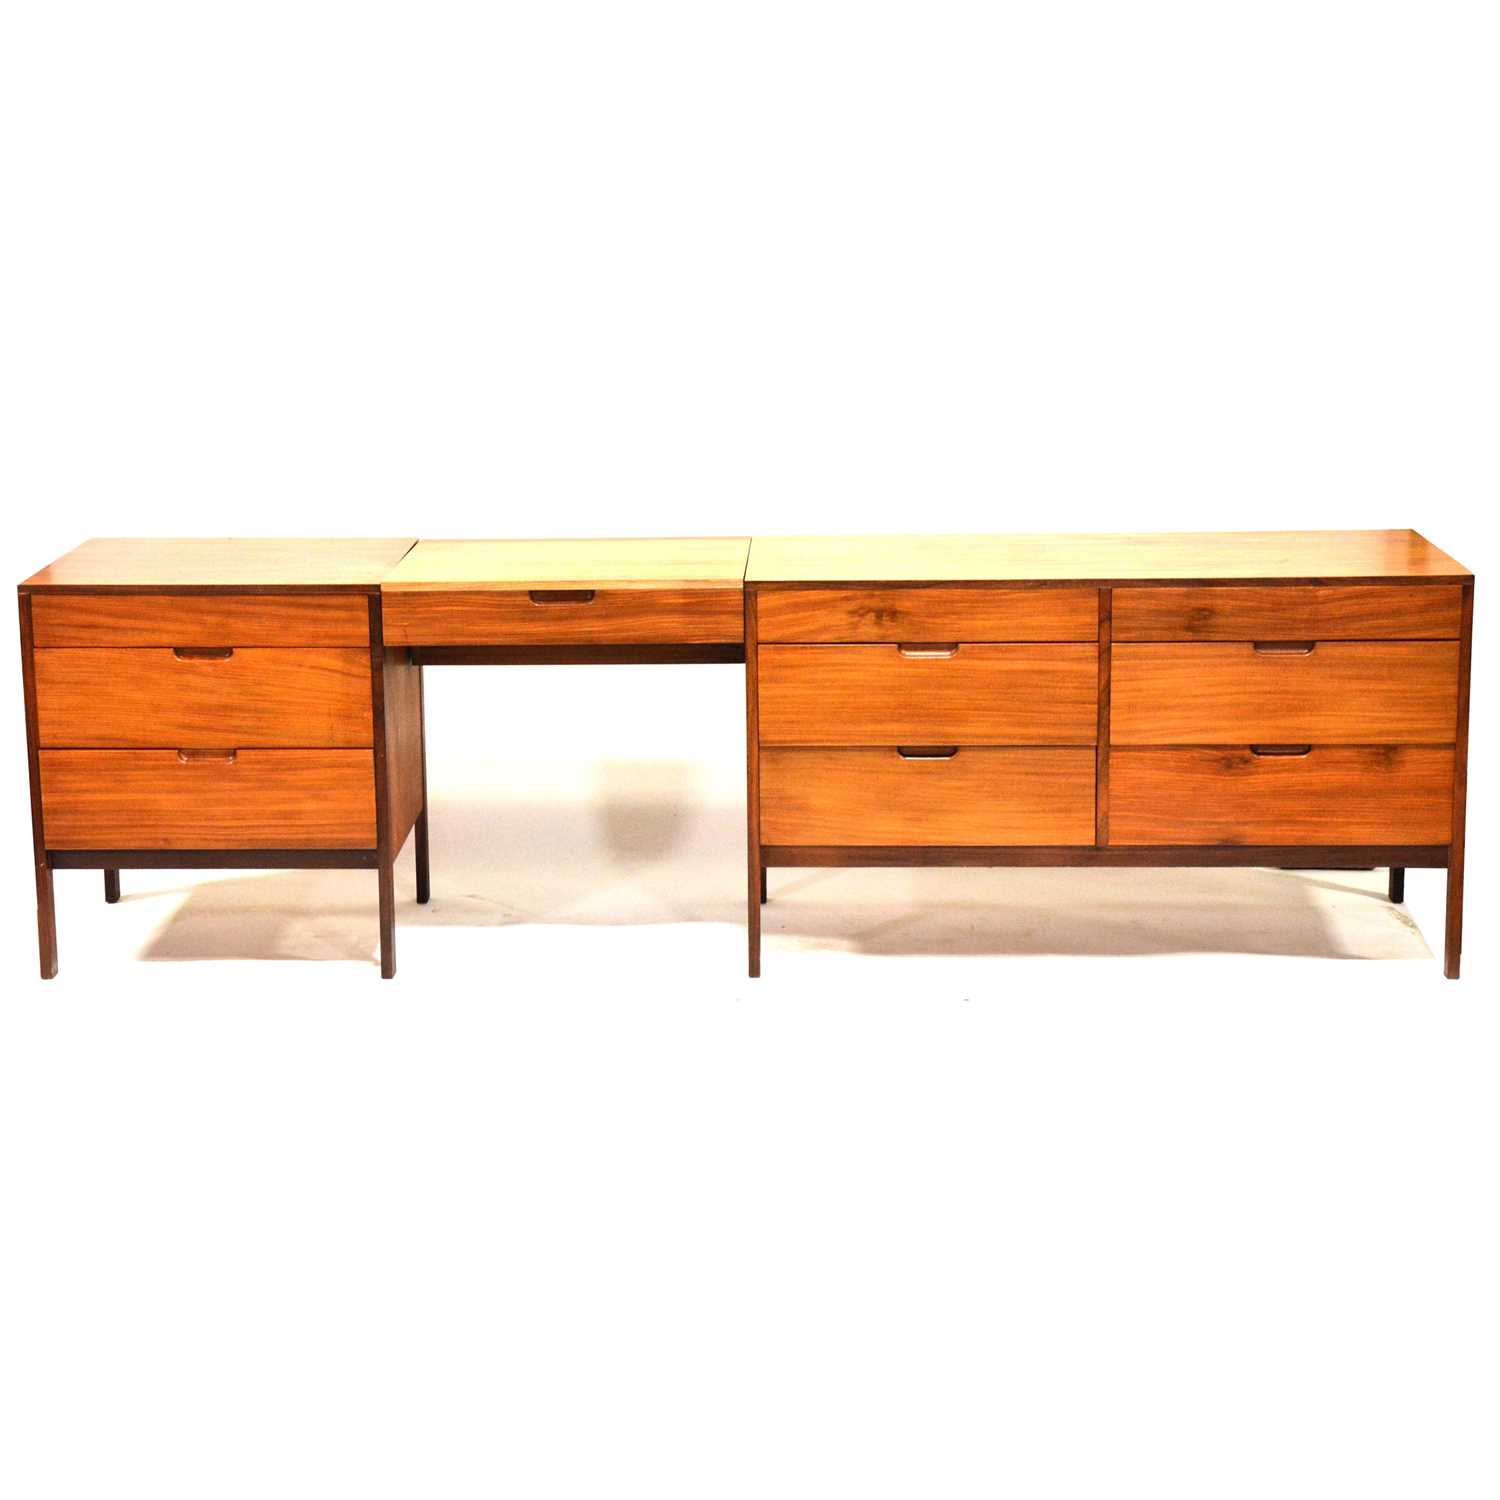 Mid-century afromosia modular dressing table and headboard, by Richard Hornby for Fyne Lady